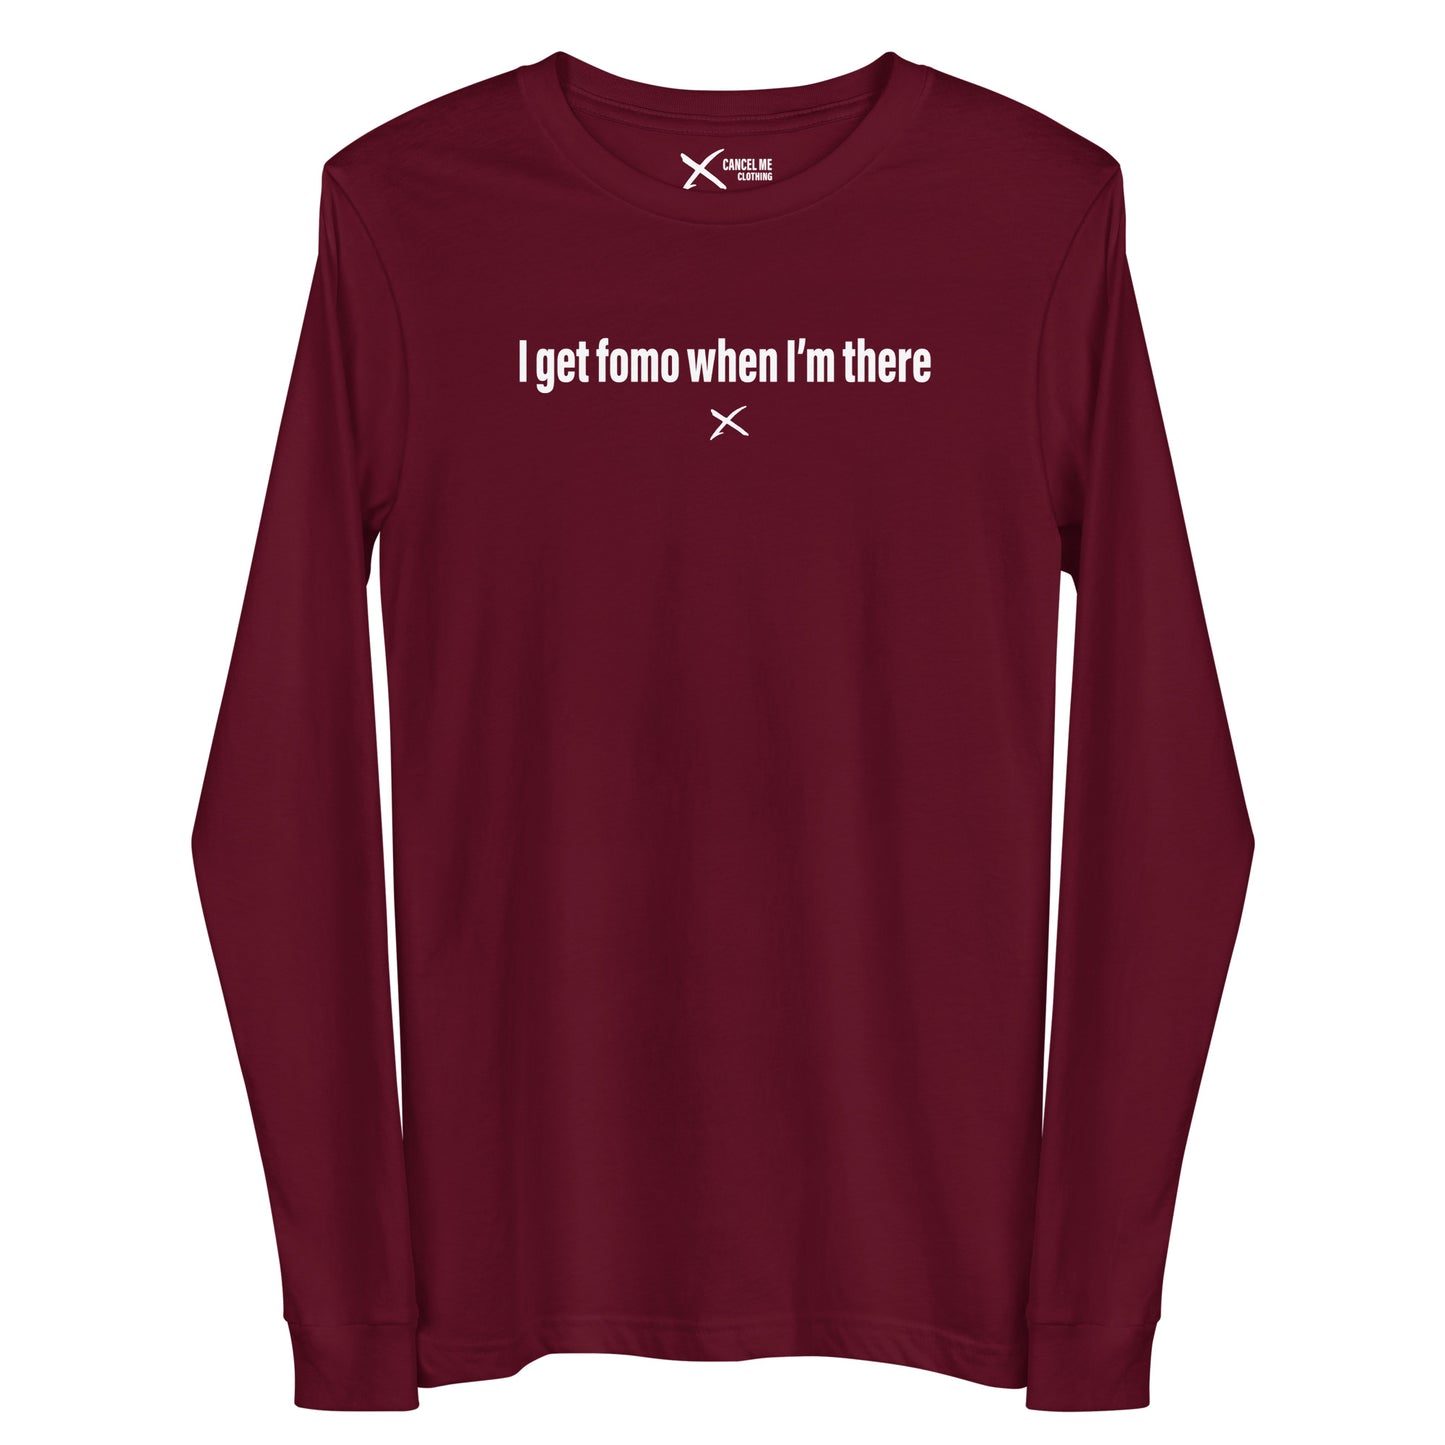 I get fomo when I'm there - Longsleeve